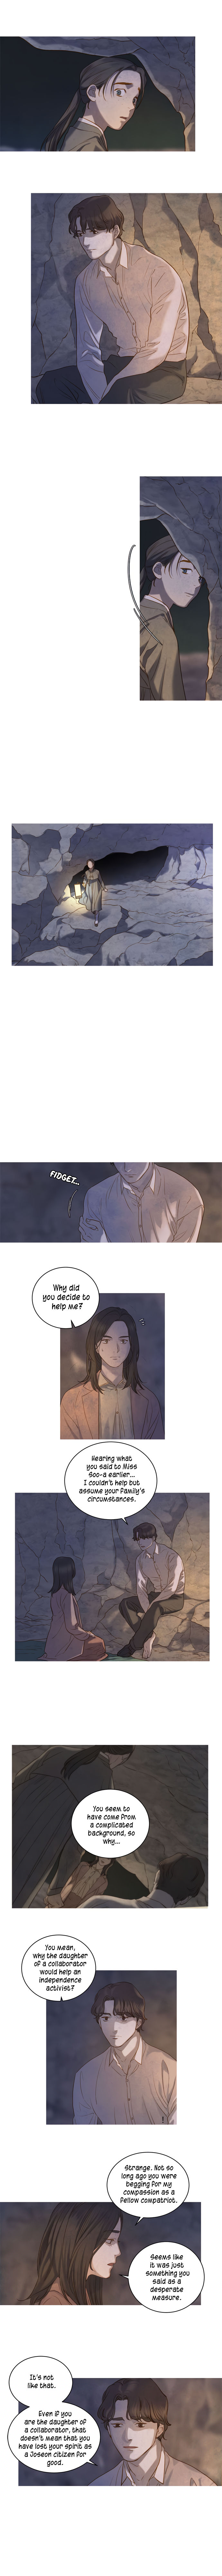 Gorae Byul - The Gyeongseong Mermaid - Chapter 5 Page 7